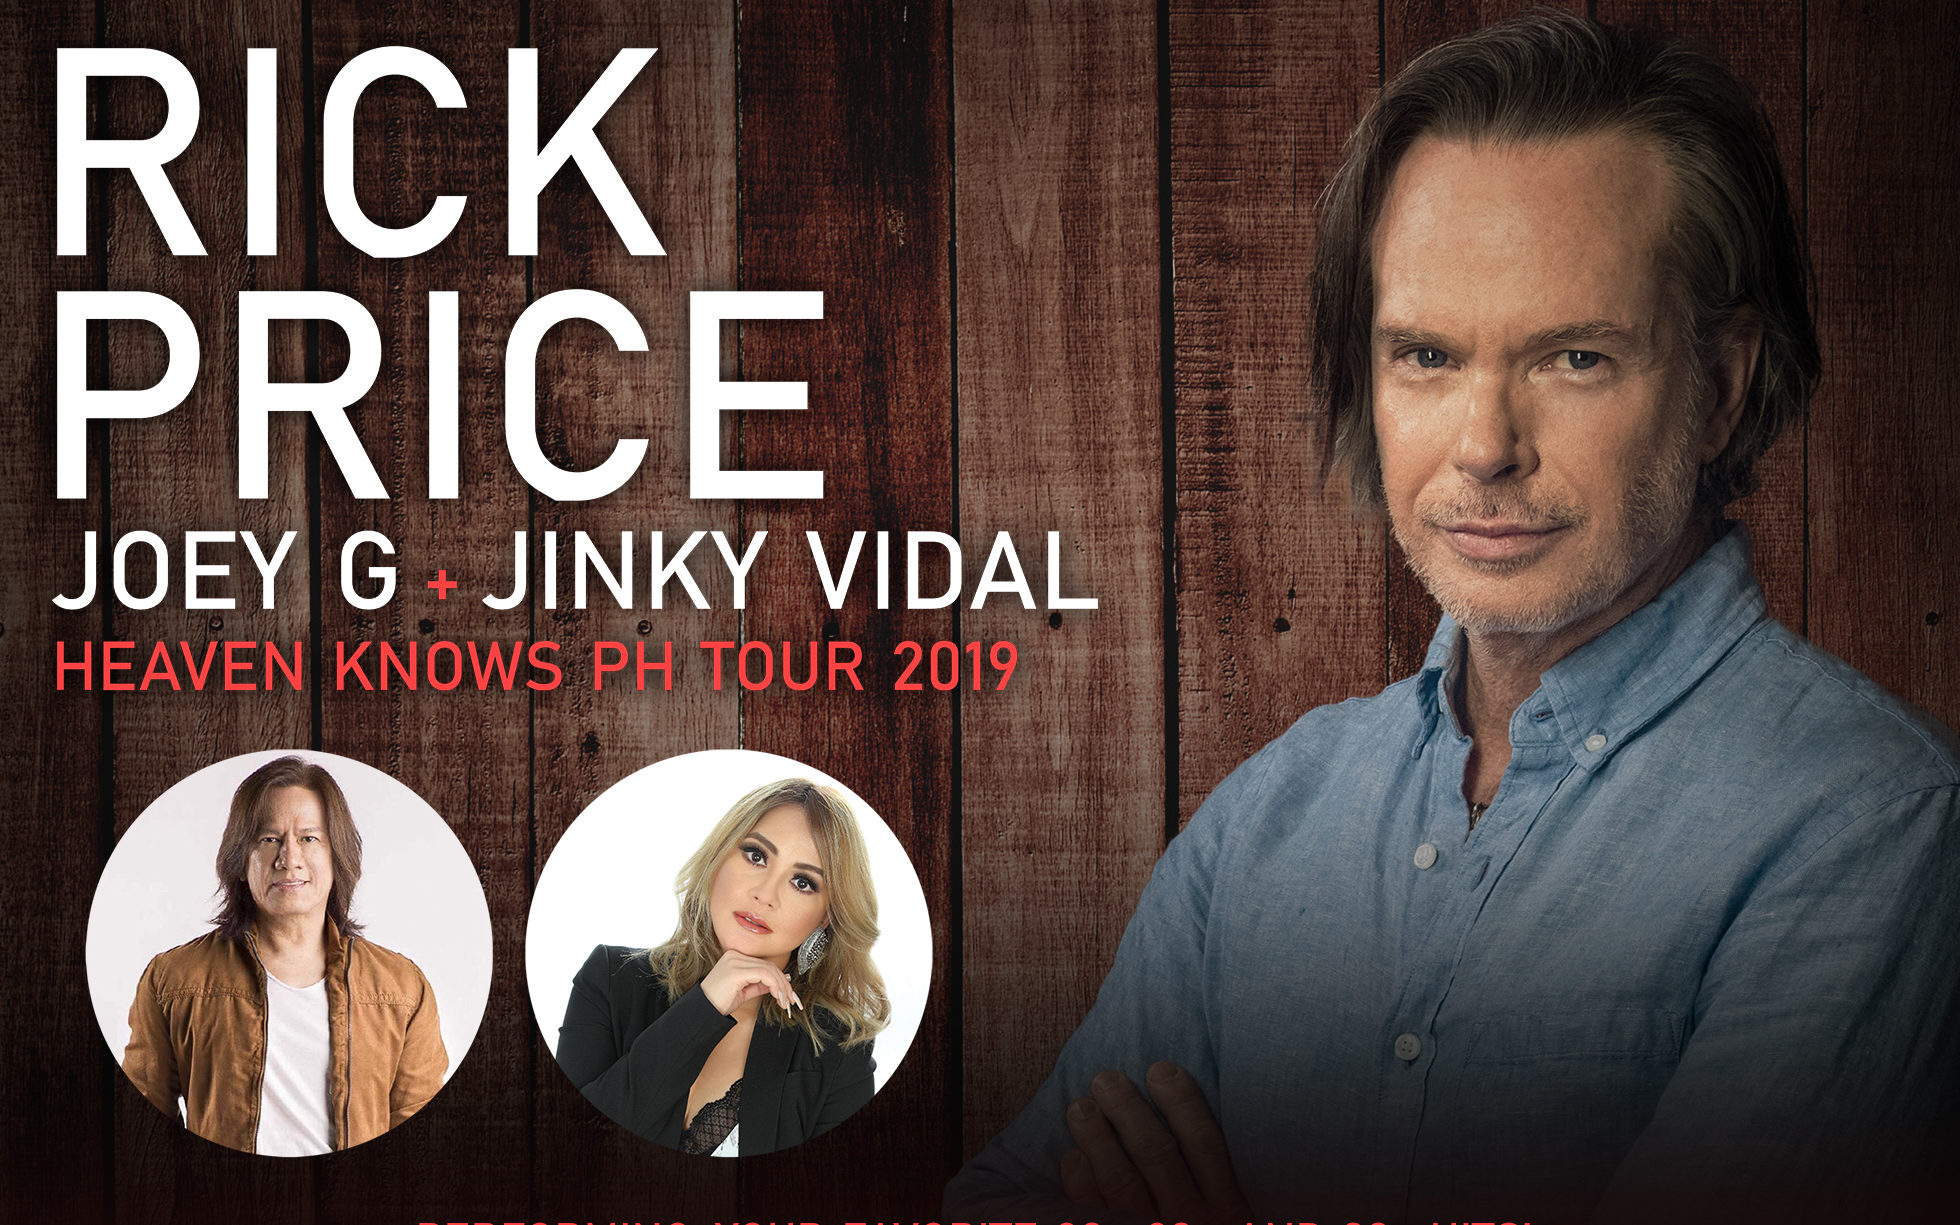 Rick Price with Joey G and Jinky Vidal for Valentine’s Week Tour